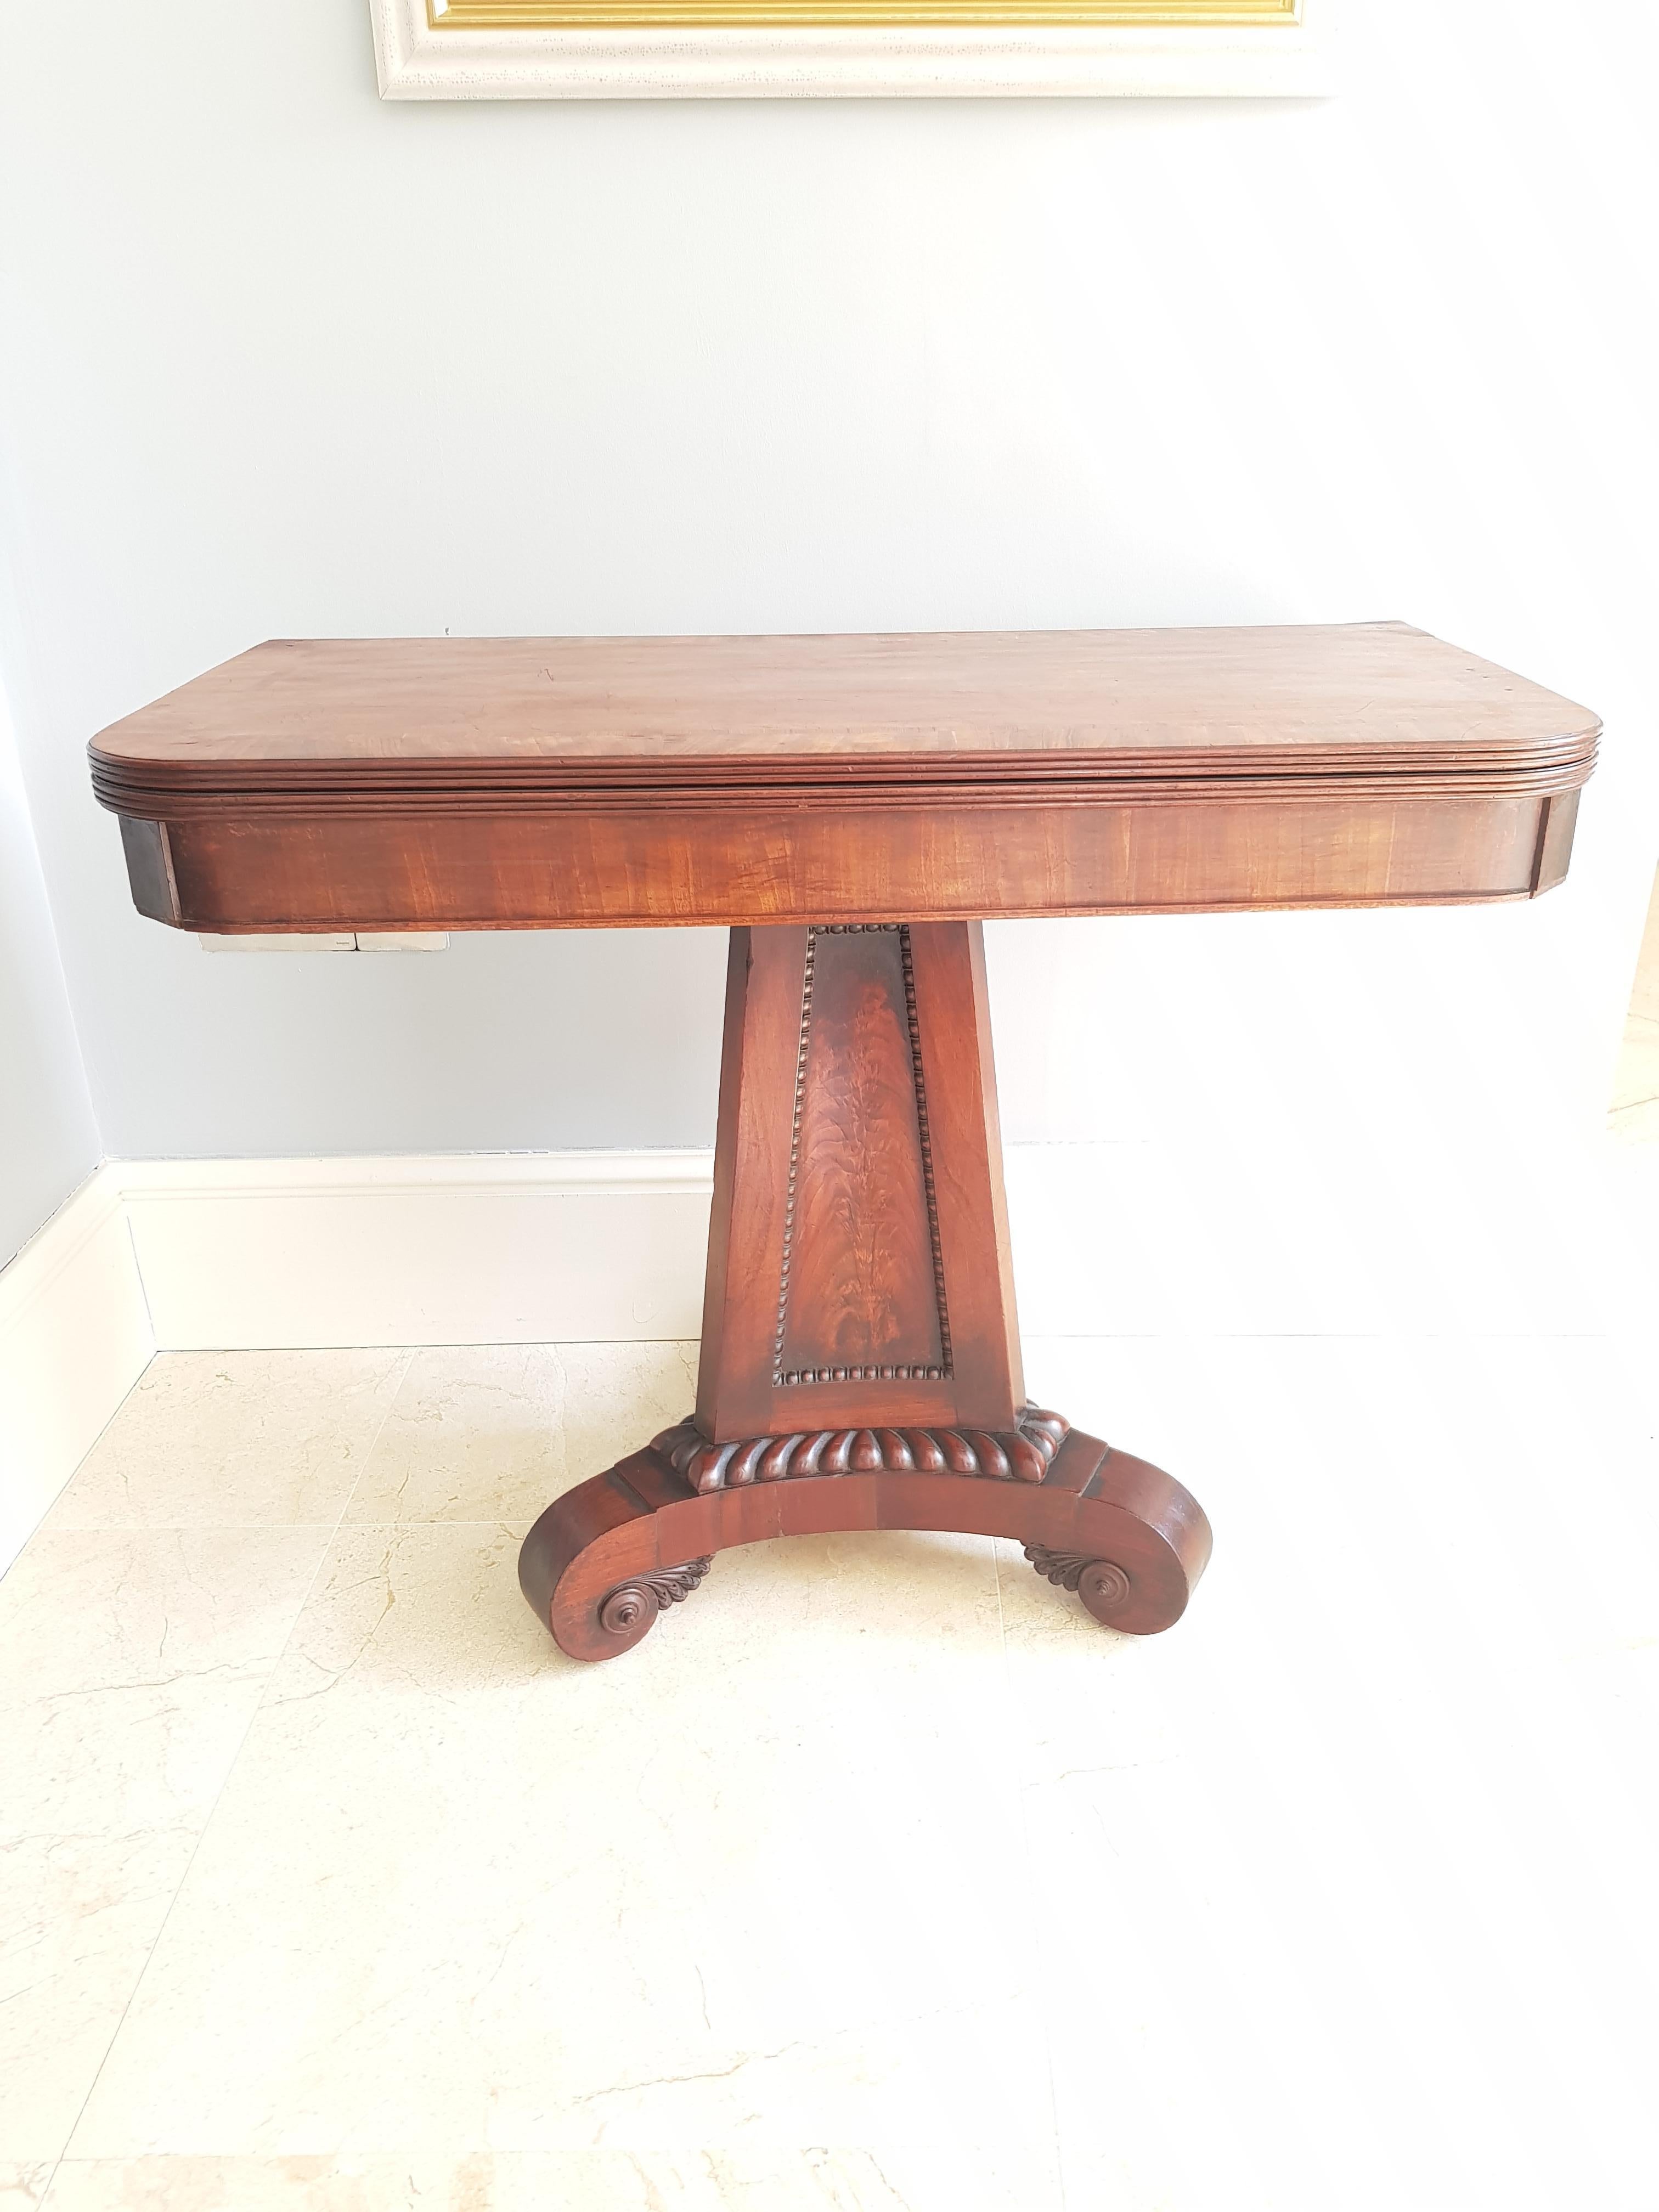 A fine Regency period tea table of Irish or English manufacture in the manner of Thomas Hope. The piece is finely carved with superior crossbanded mahogany leaves over a contained storage compartment, with a finely carved pedestal support and